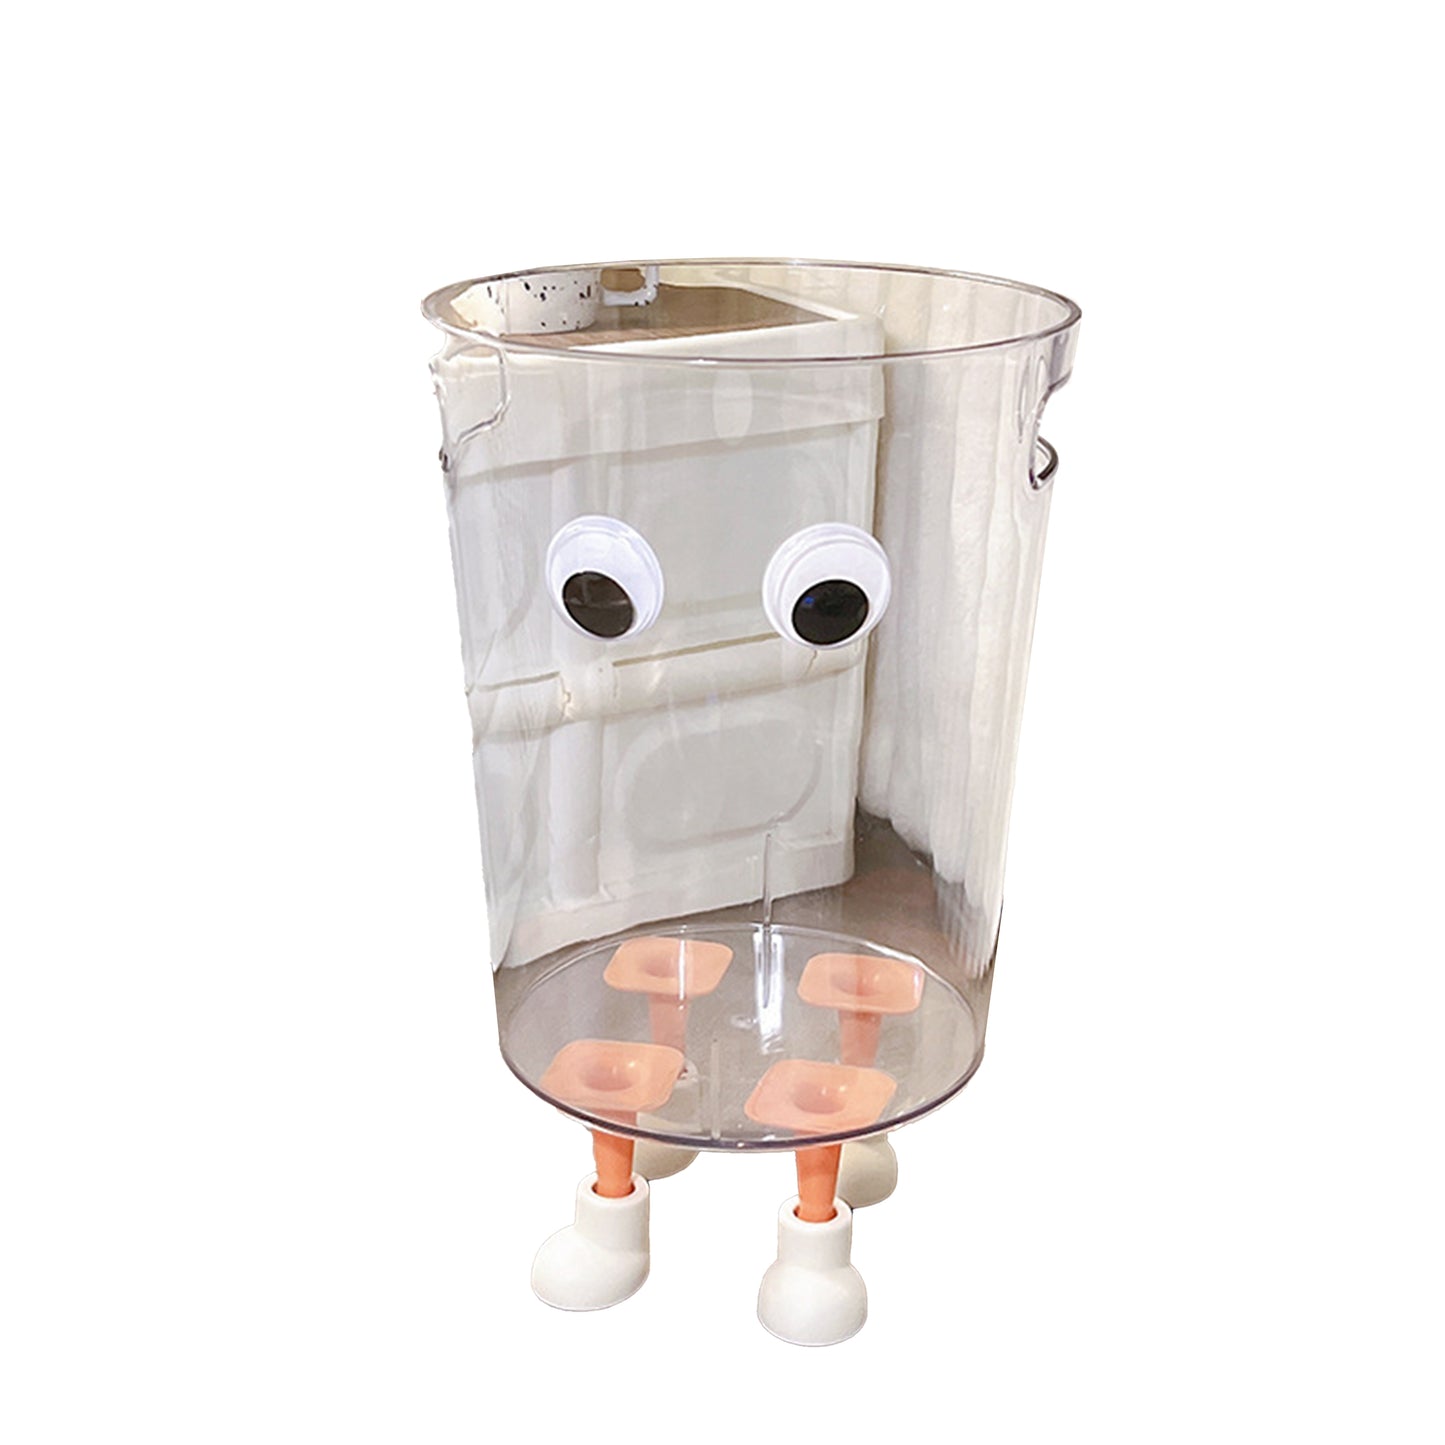 DIY Trash Can Butler-Feet, Hands and Face